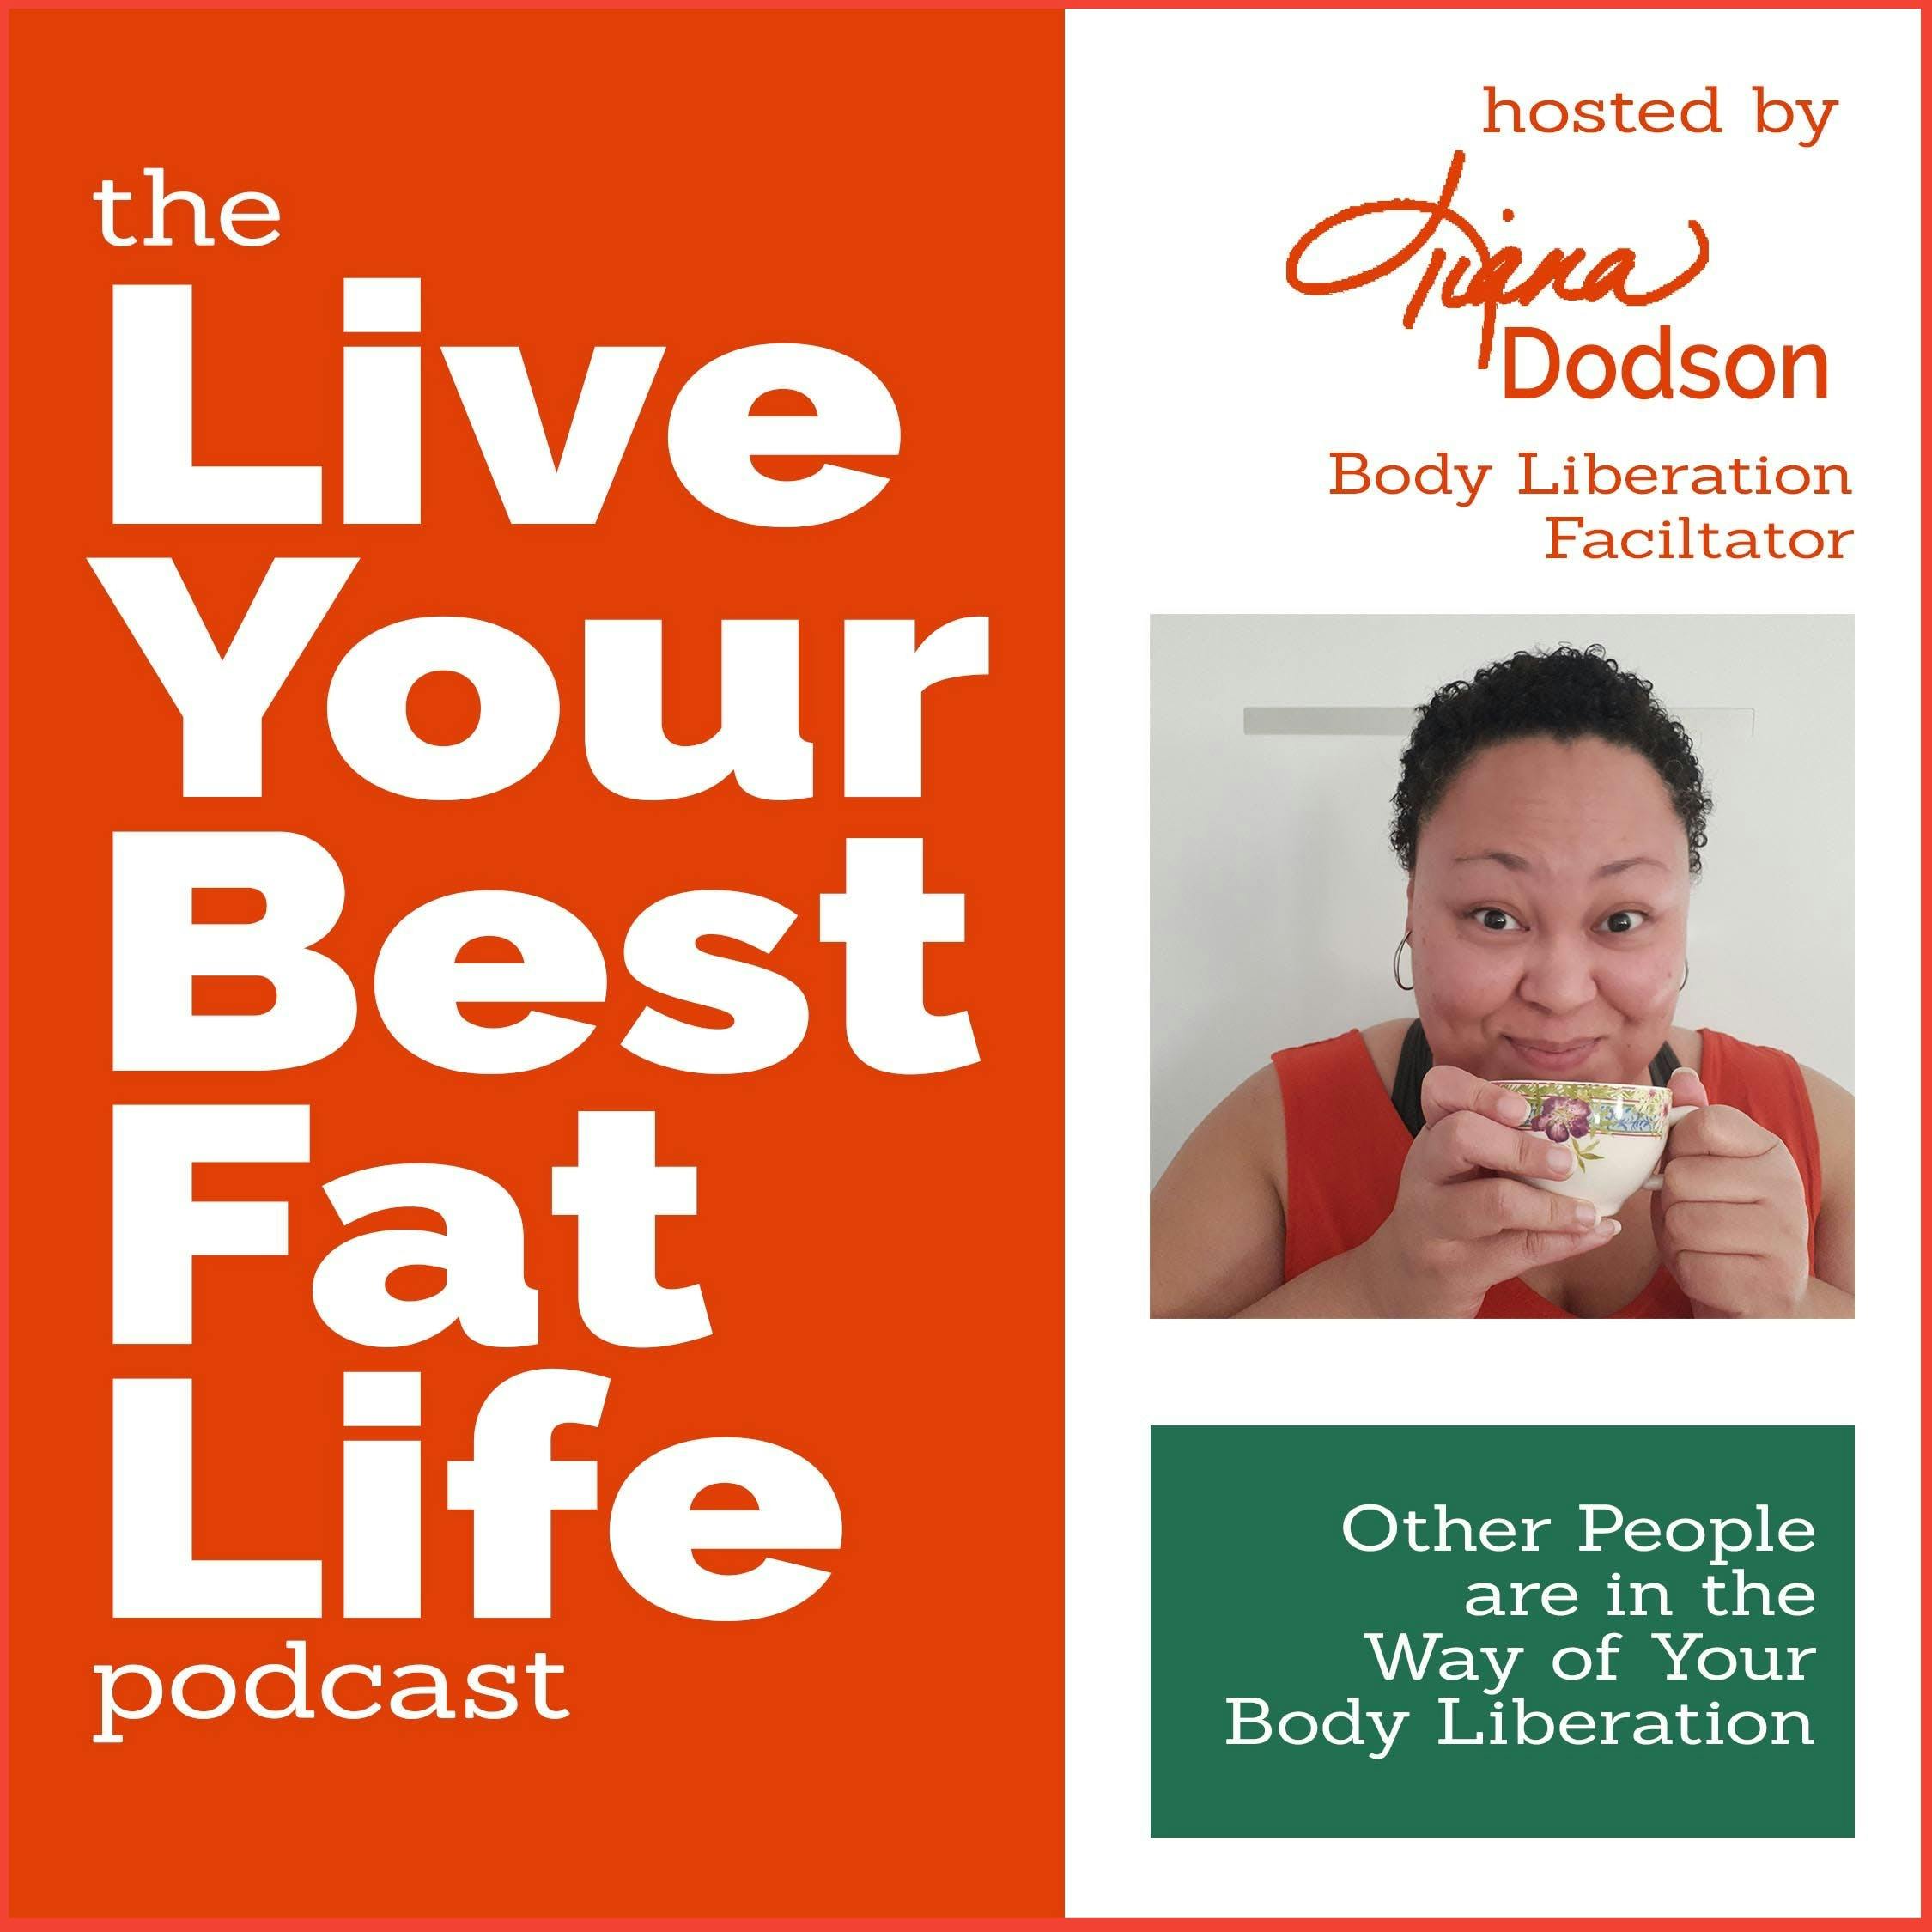 Live Your Best Fat Life episode "Other People are in the Way of Your Body Liberation"